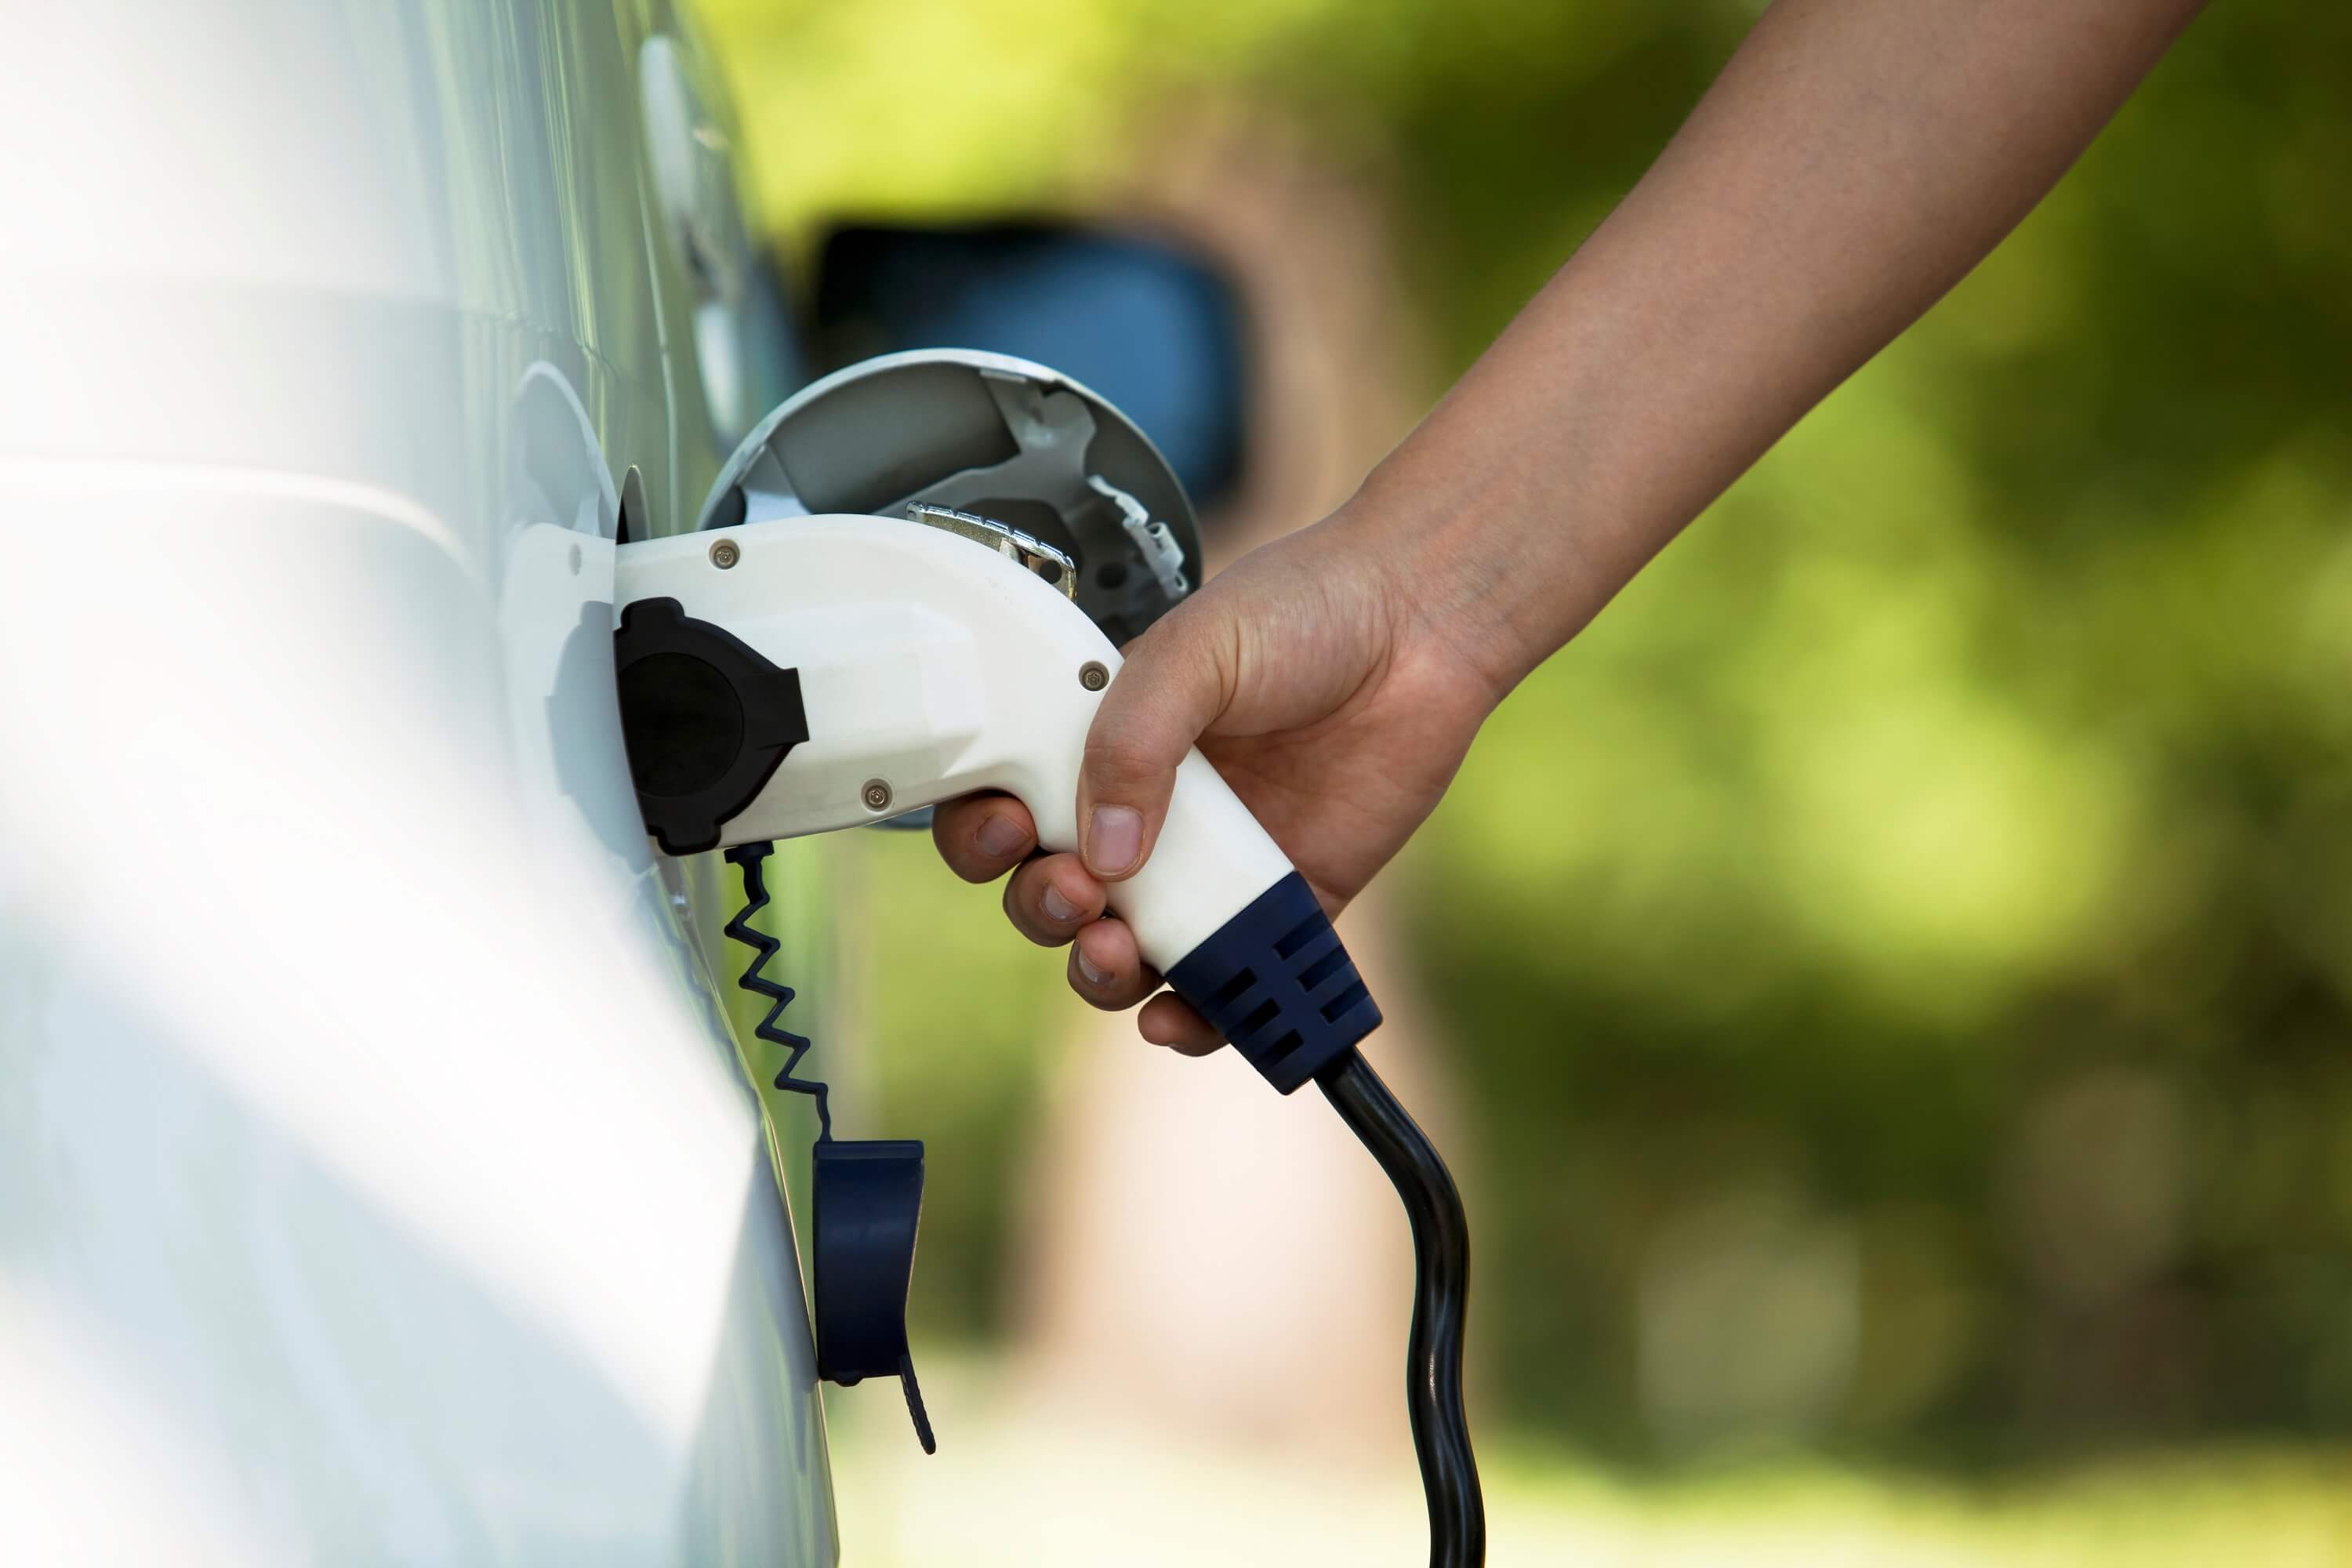 Becoming more fuel efficient with eco-friendly swaps